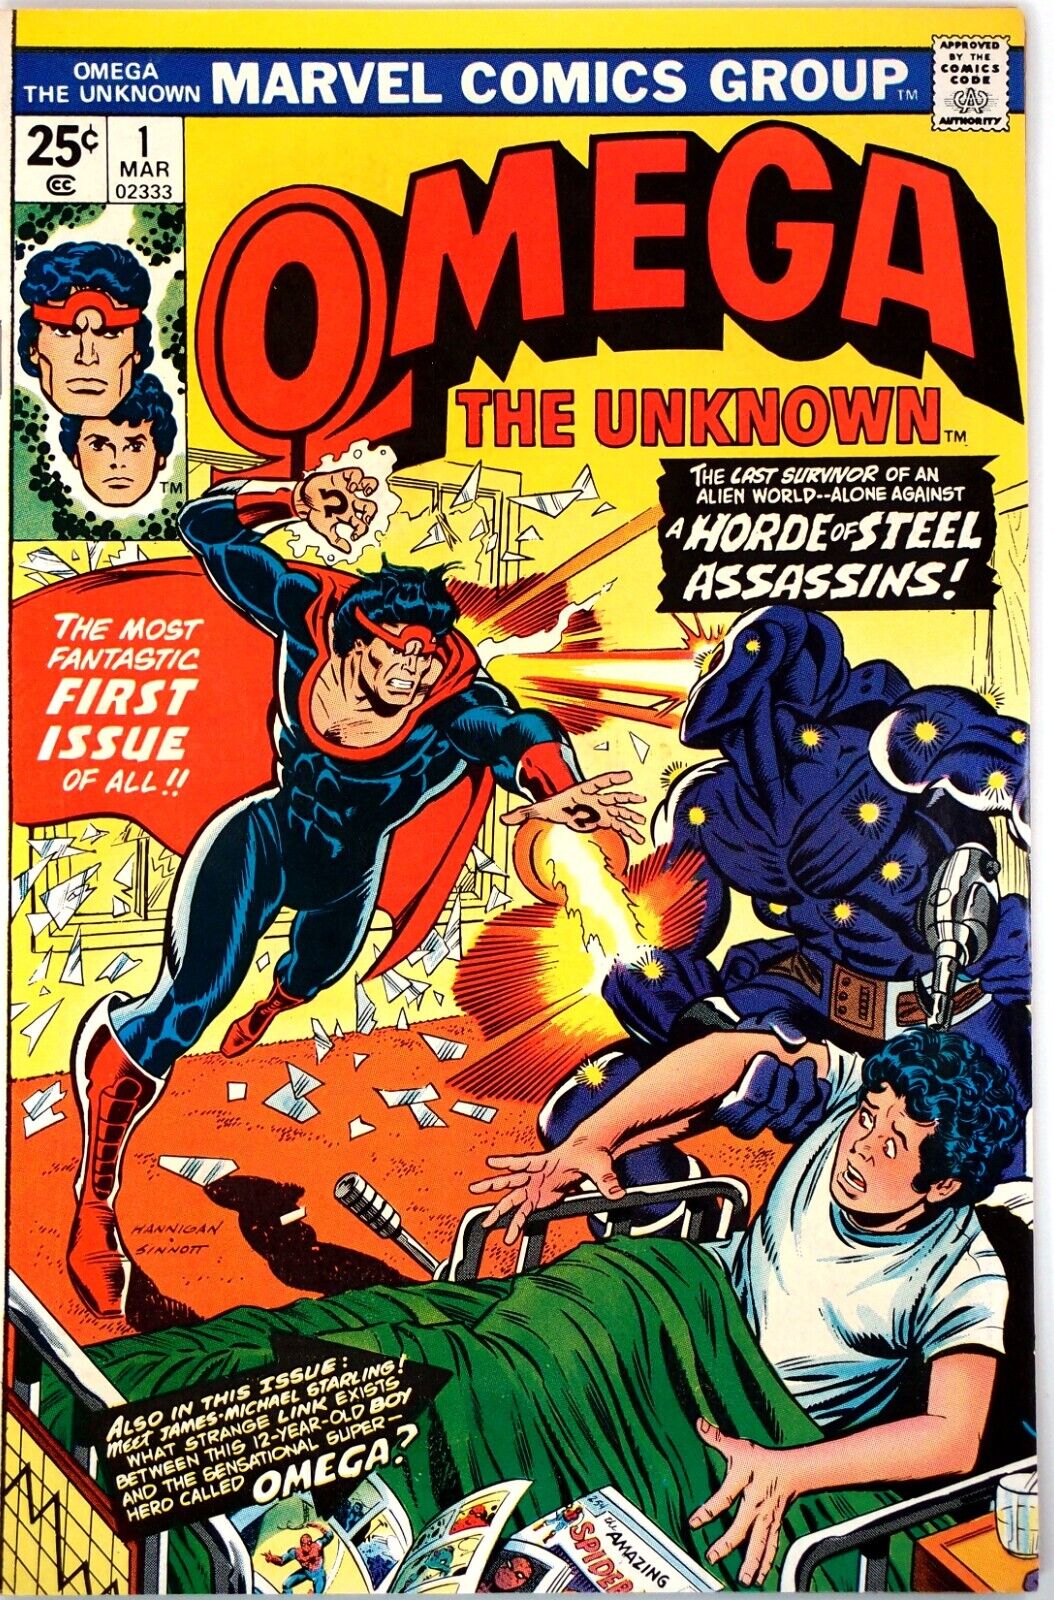 Omega the Unknown #1-#10, a cult classic Full run of rare 1970s Marvel title